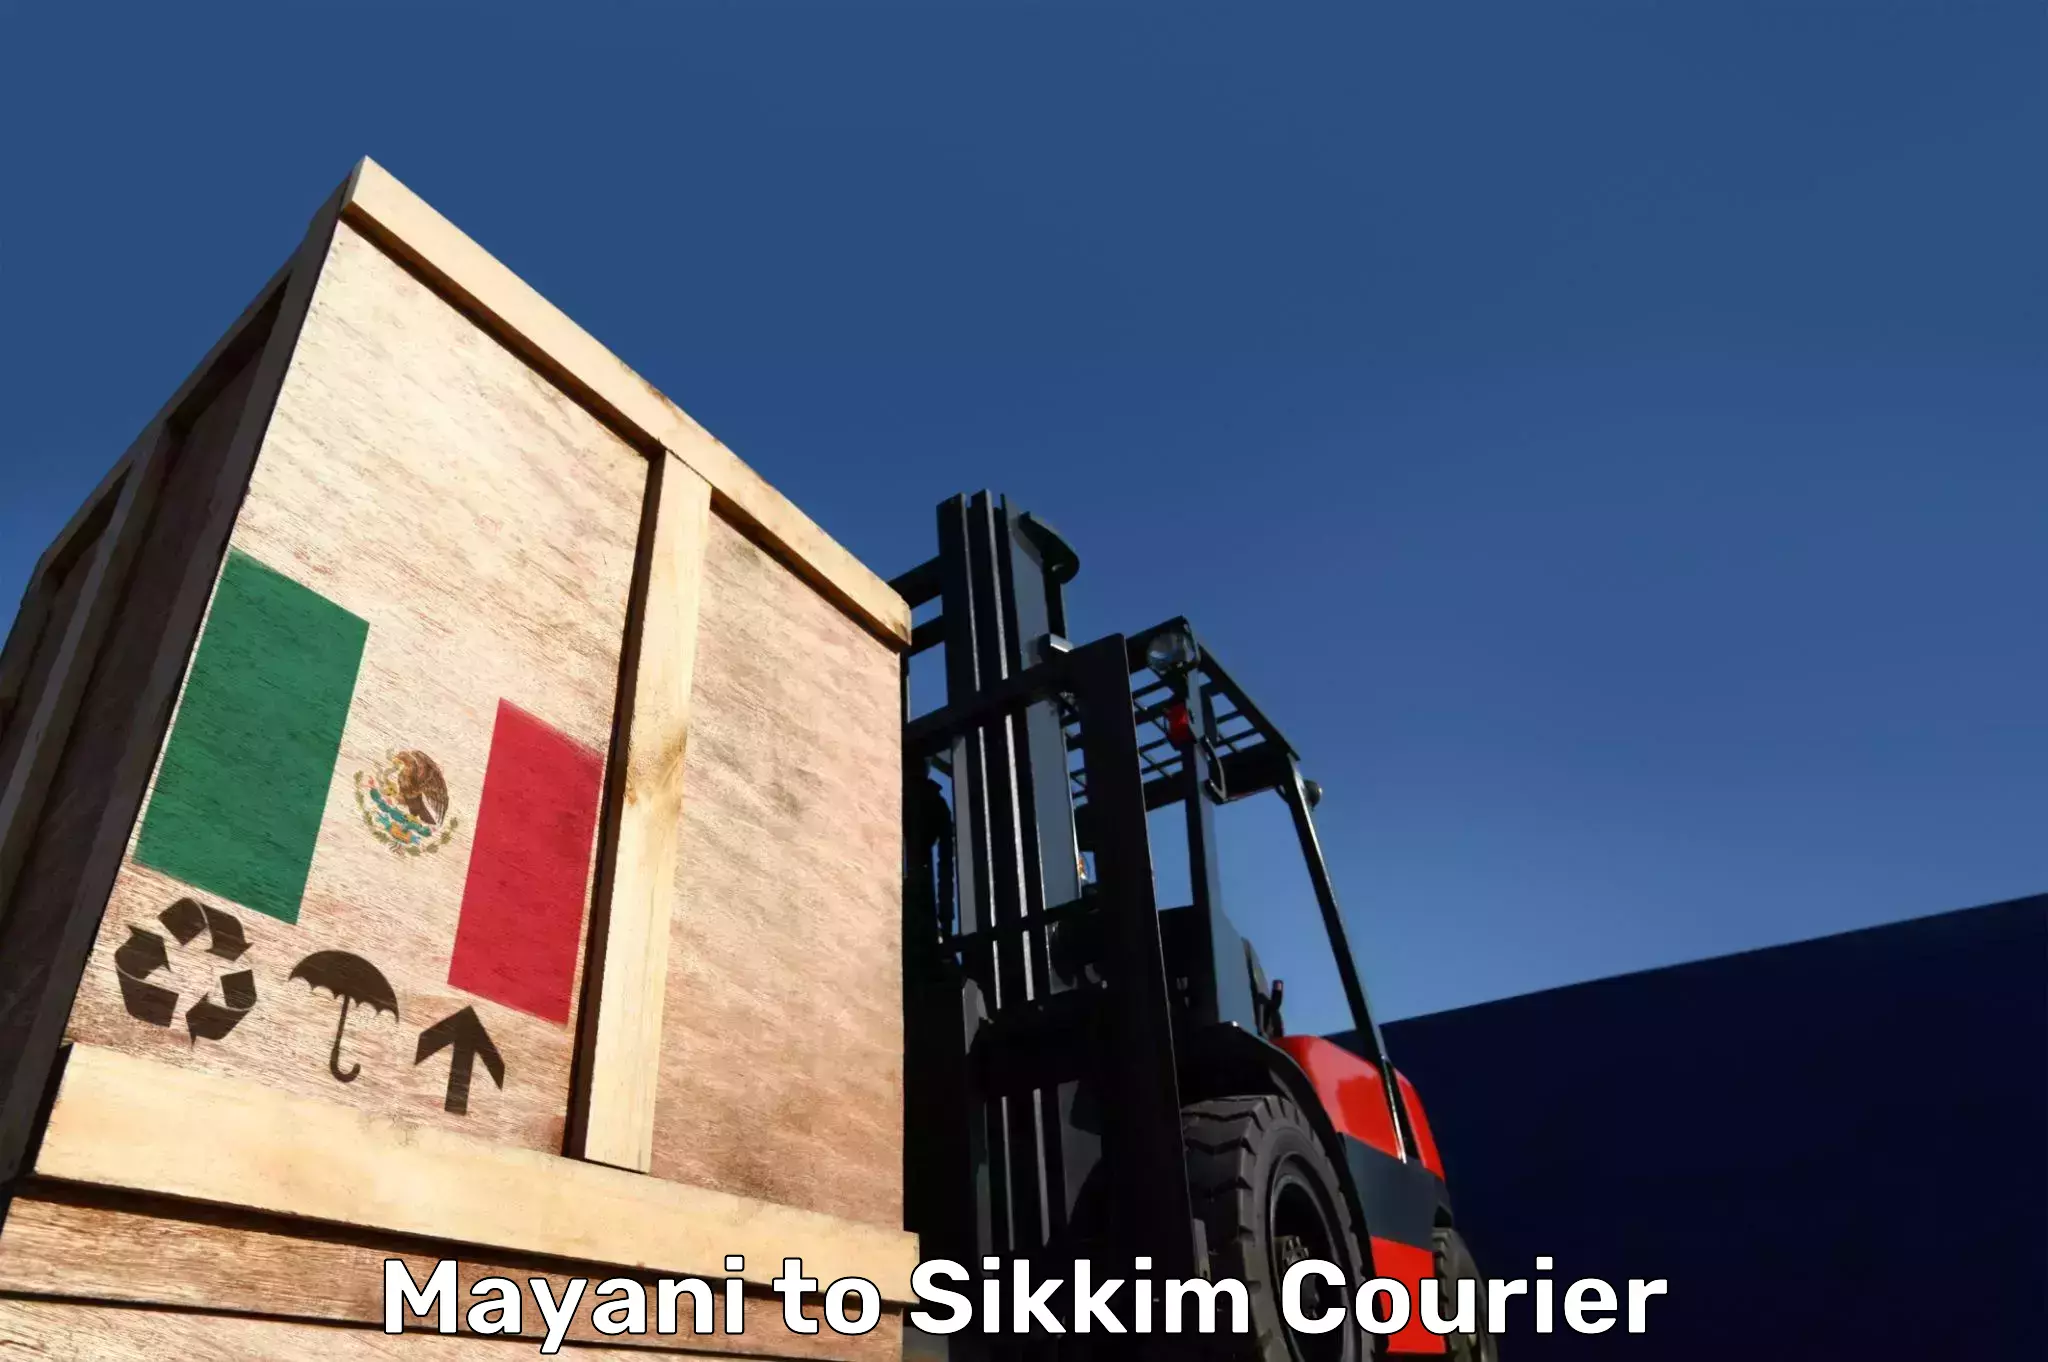 Luggage transport consultancy Mayani to East Sikkim